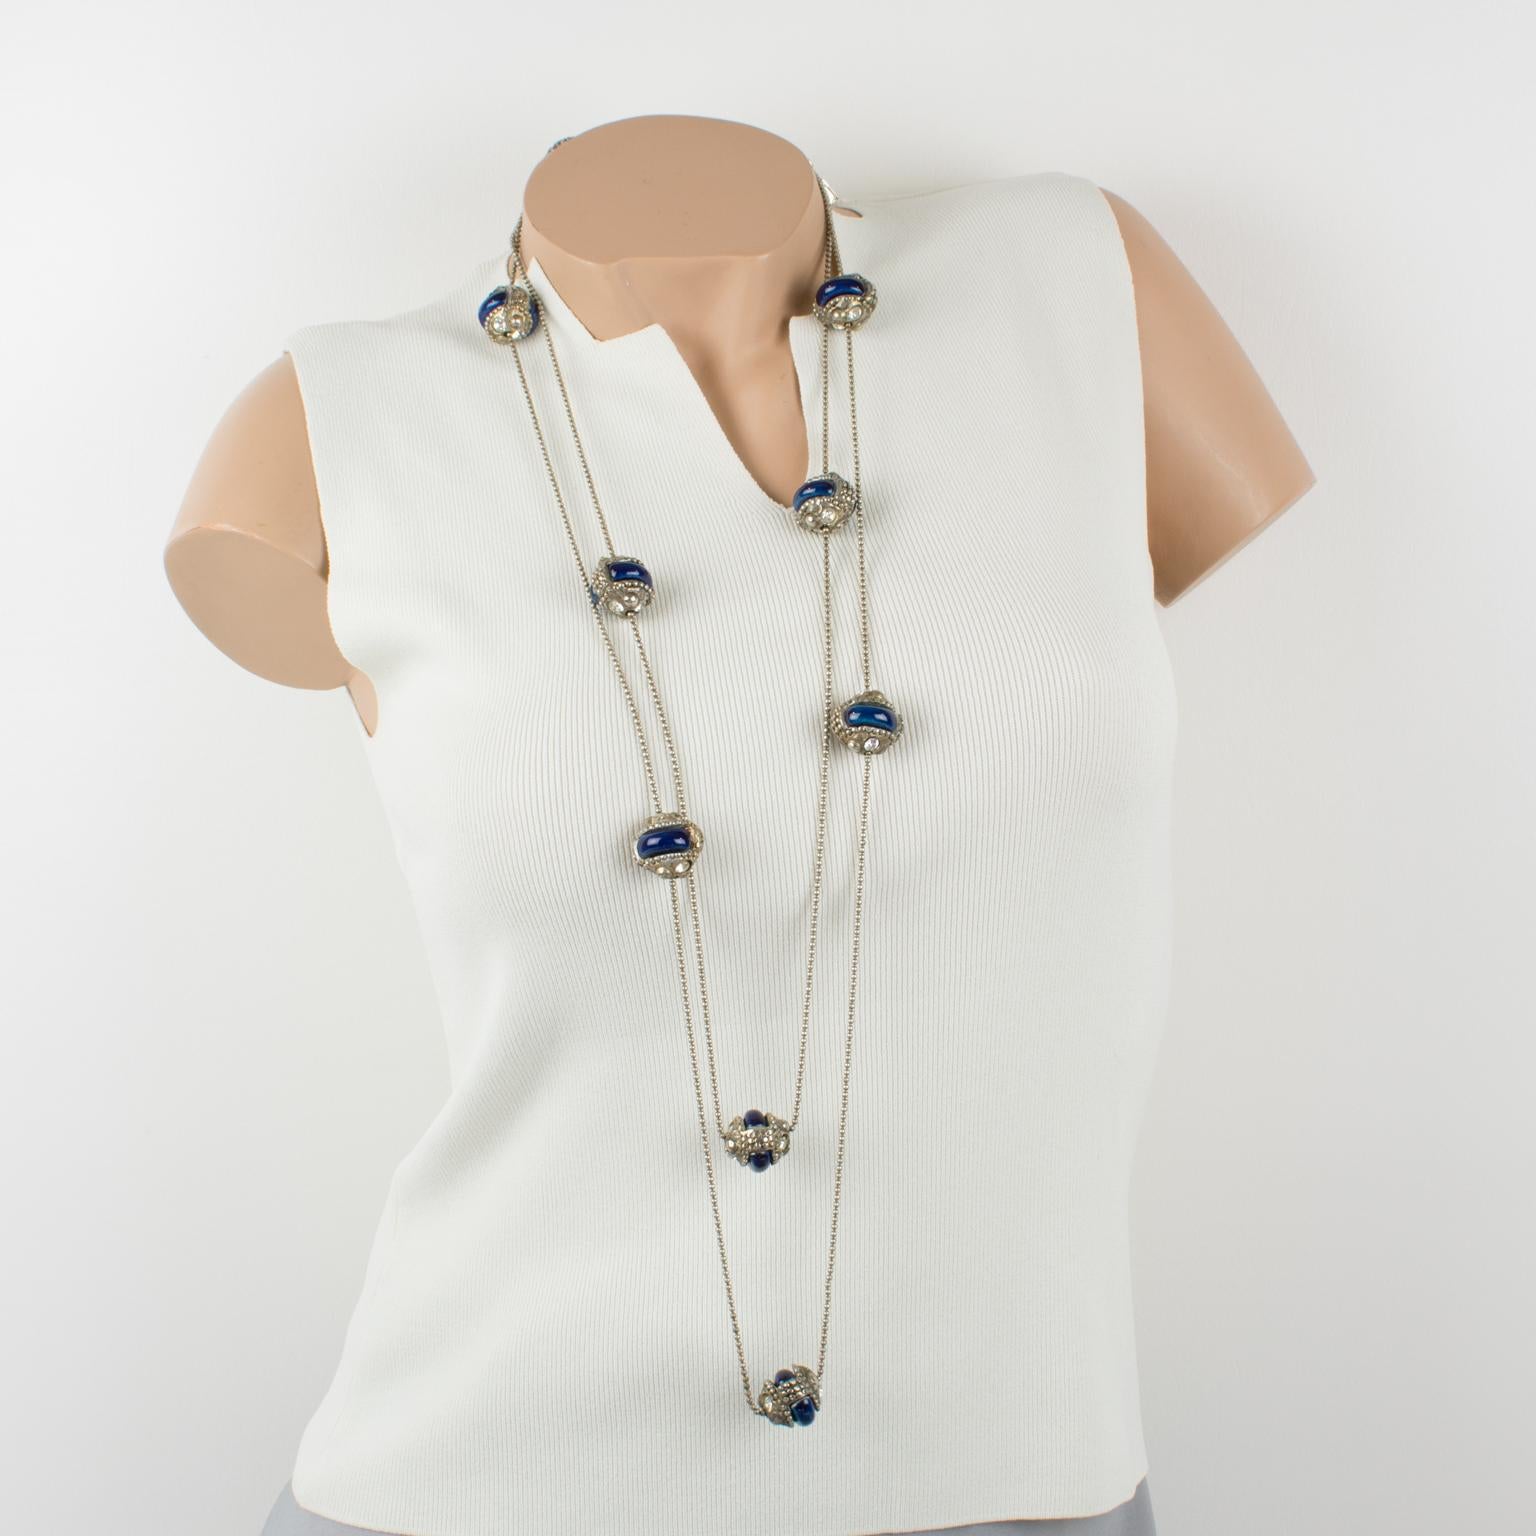 This stunning French designer Alexis Lahellec Paris extra-long necklace features an unusual piece of jewelry with an XXL long silvered metal chain. The chain necklace boasts silvered metal-coated resin beads with cobalt blue ceramic elements and